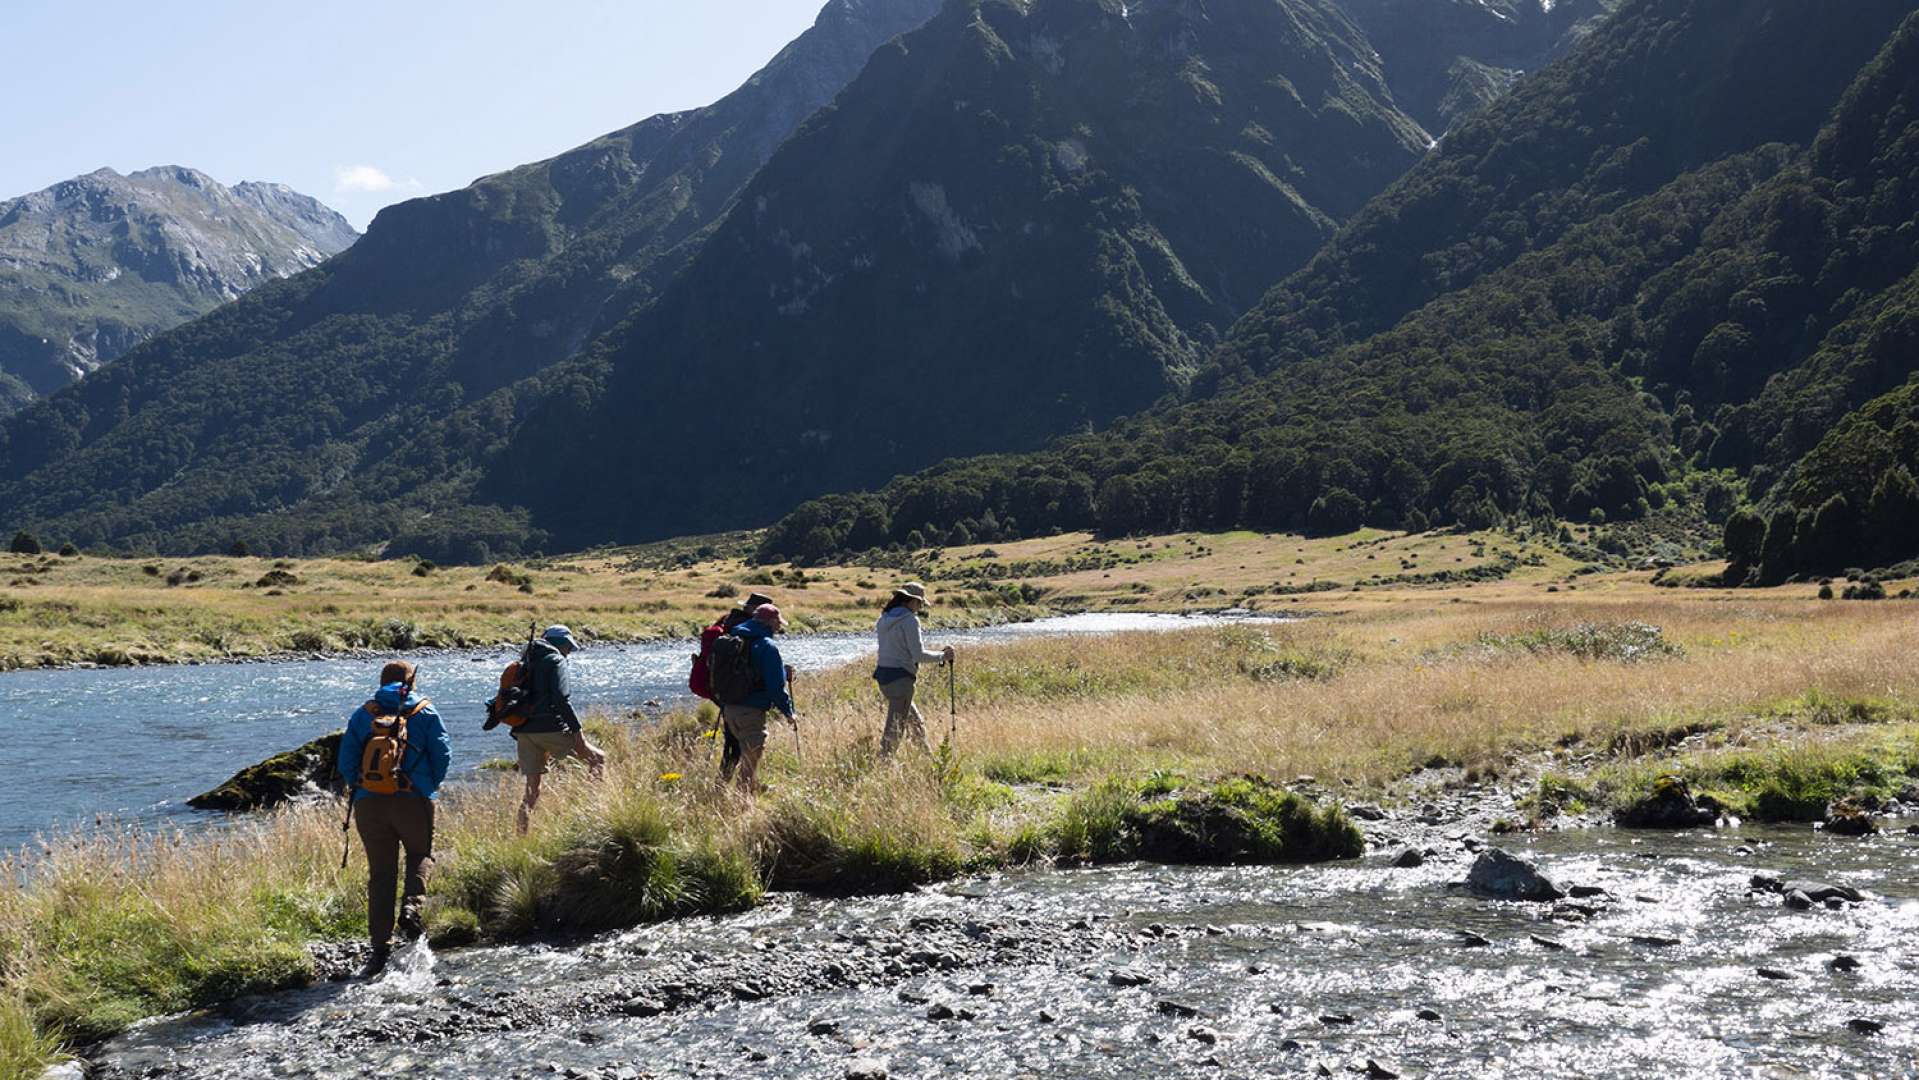 Fly, Walk, and Jet boat amongst some of New Zealand�s most spectacular, unspoilt scenery.